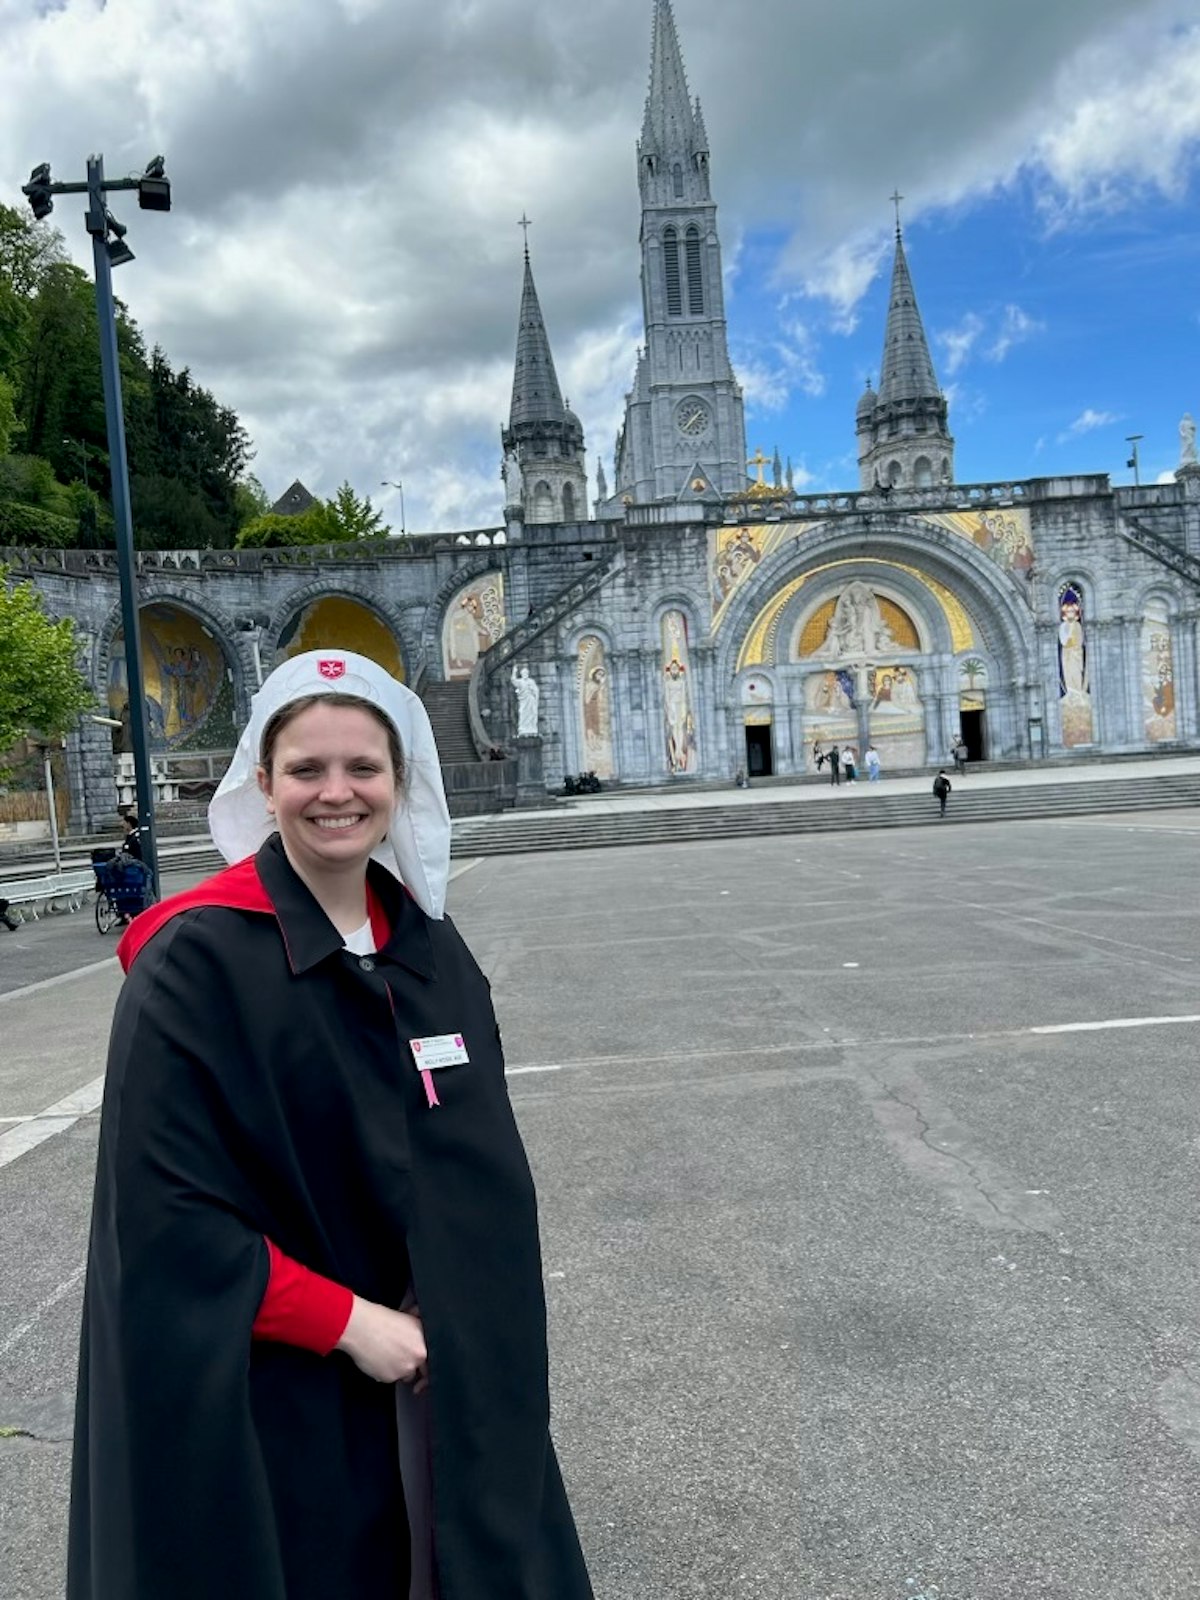 Modes recalls fondly her first pilgrimage experience to Lourdes, which she likened to a "Catholic Disney World." As a member of the Order of Malta herself, Modes wants to help other children experience the same graces she did.